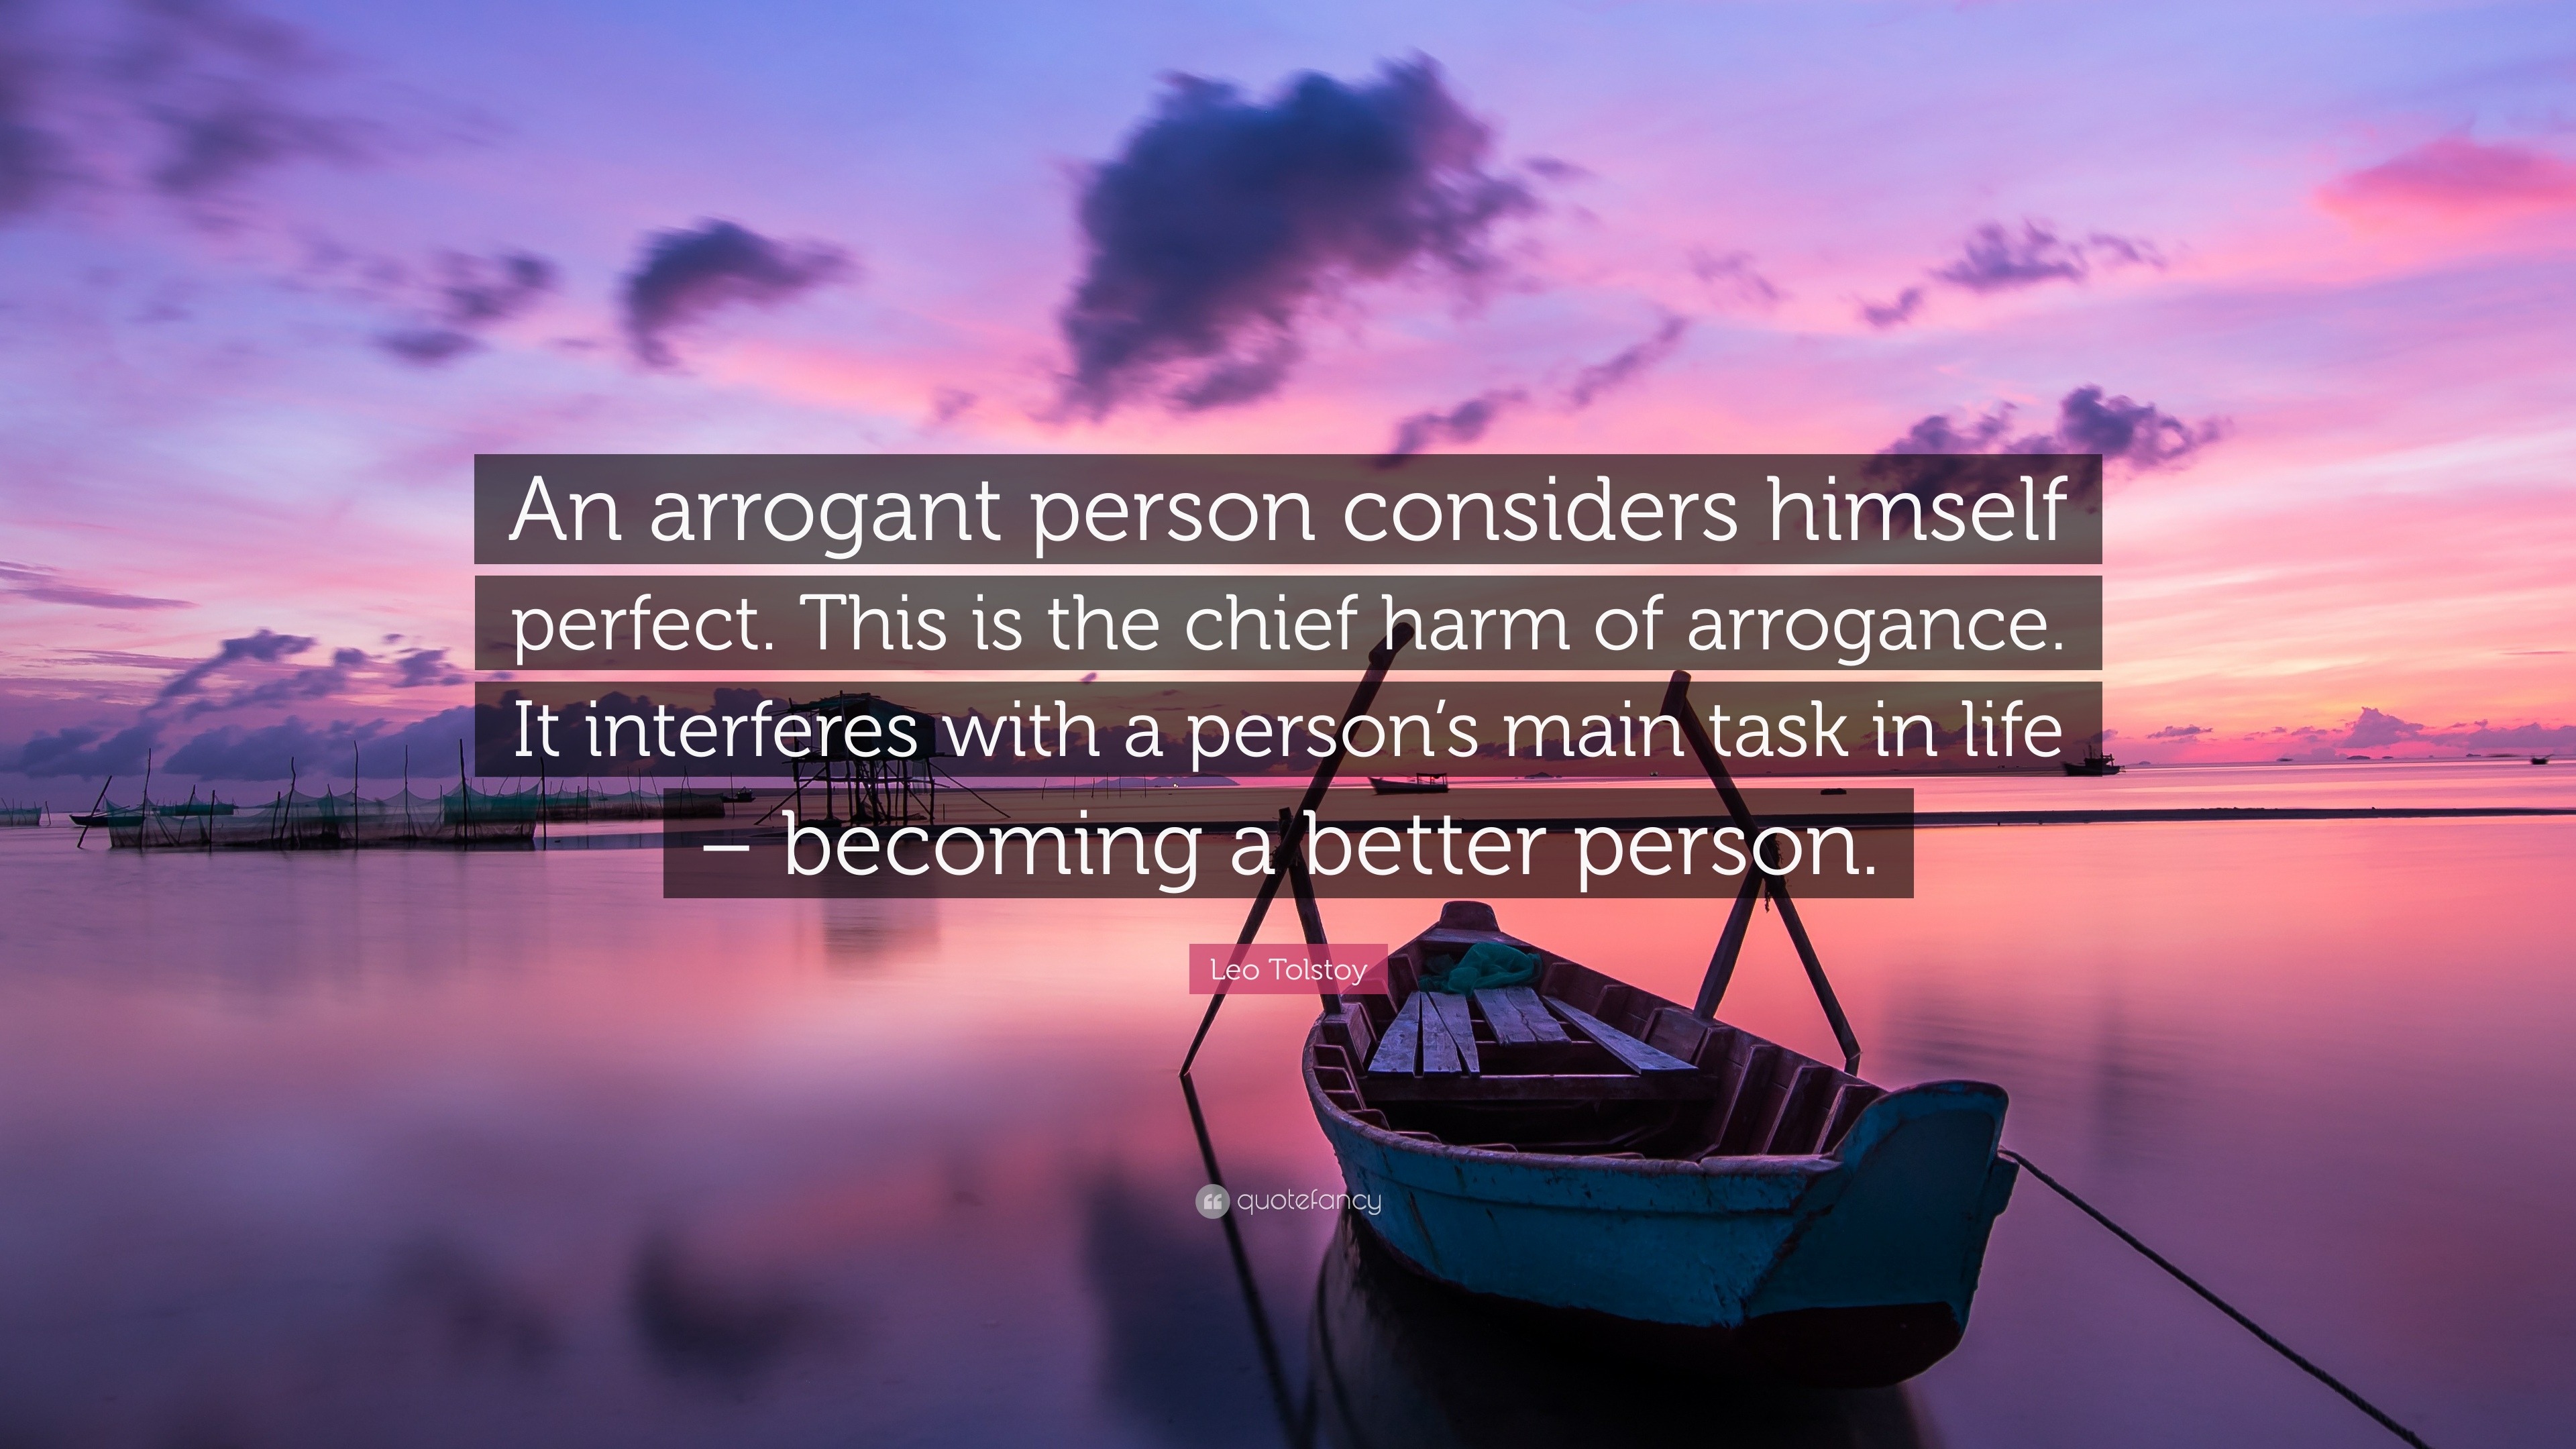 Leo Tolstoy Quote: “An arrogant person considers himself perfect. This